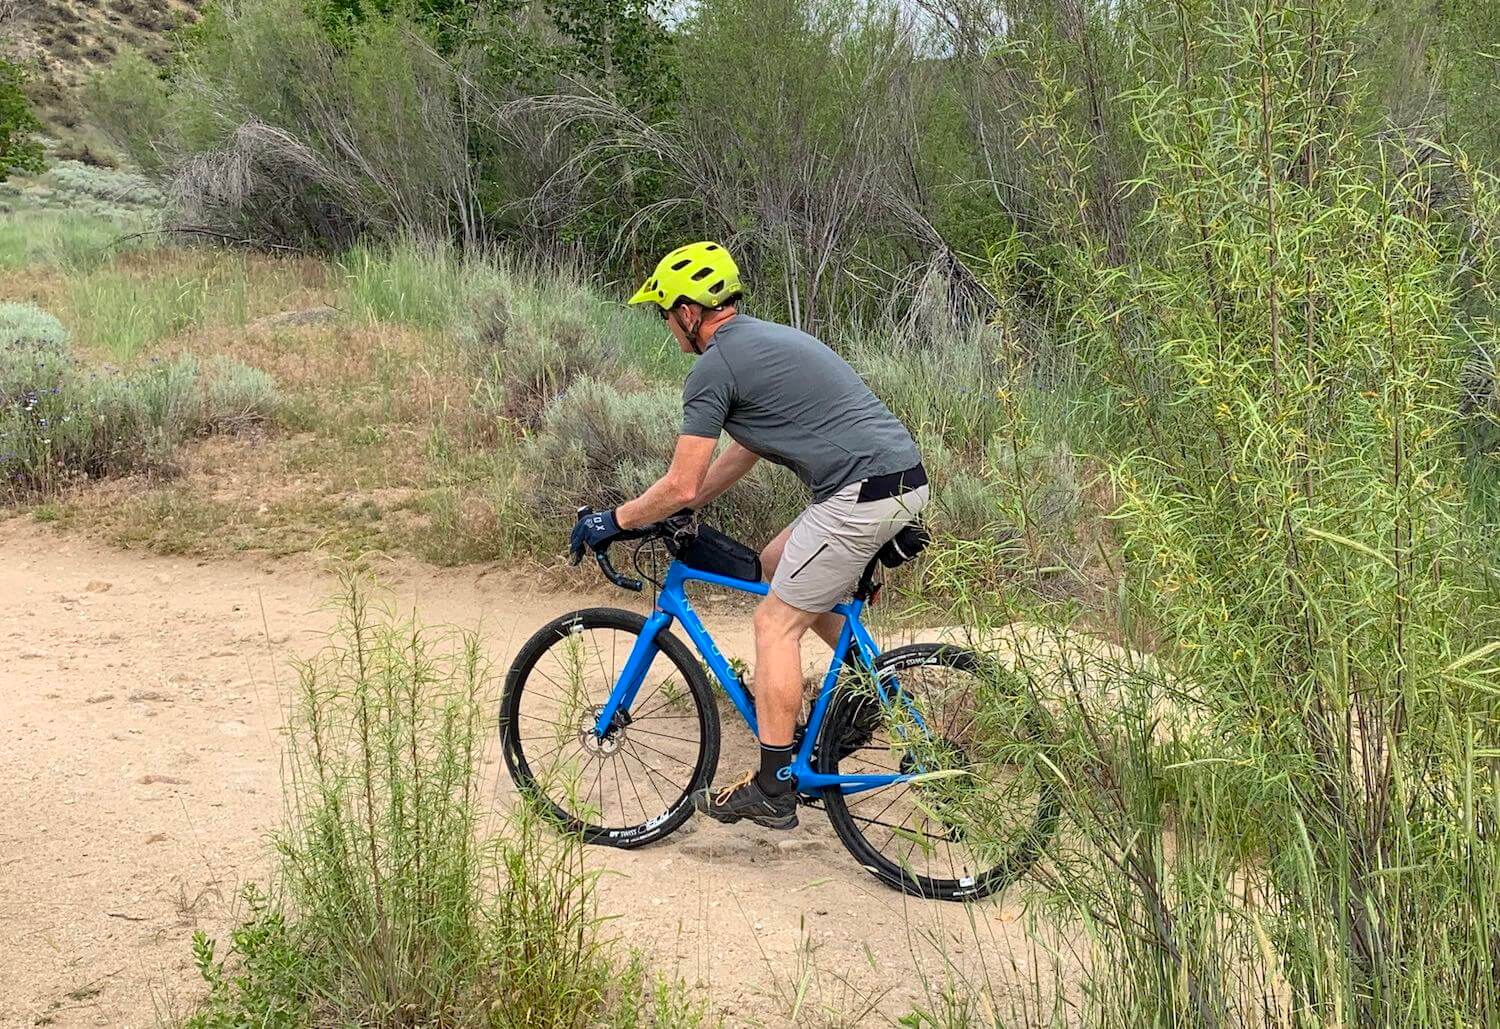 This review photo shows the author testing the Showers Pass Apex Merino Tech shirt while riding a gravel bike.